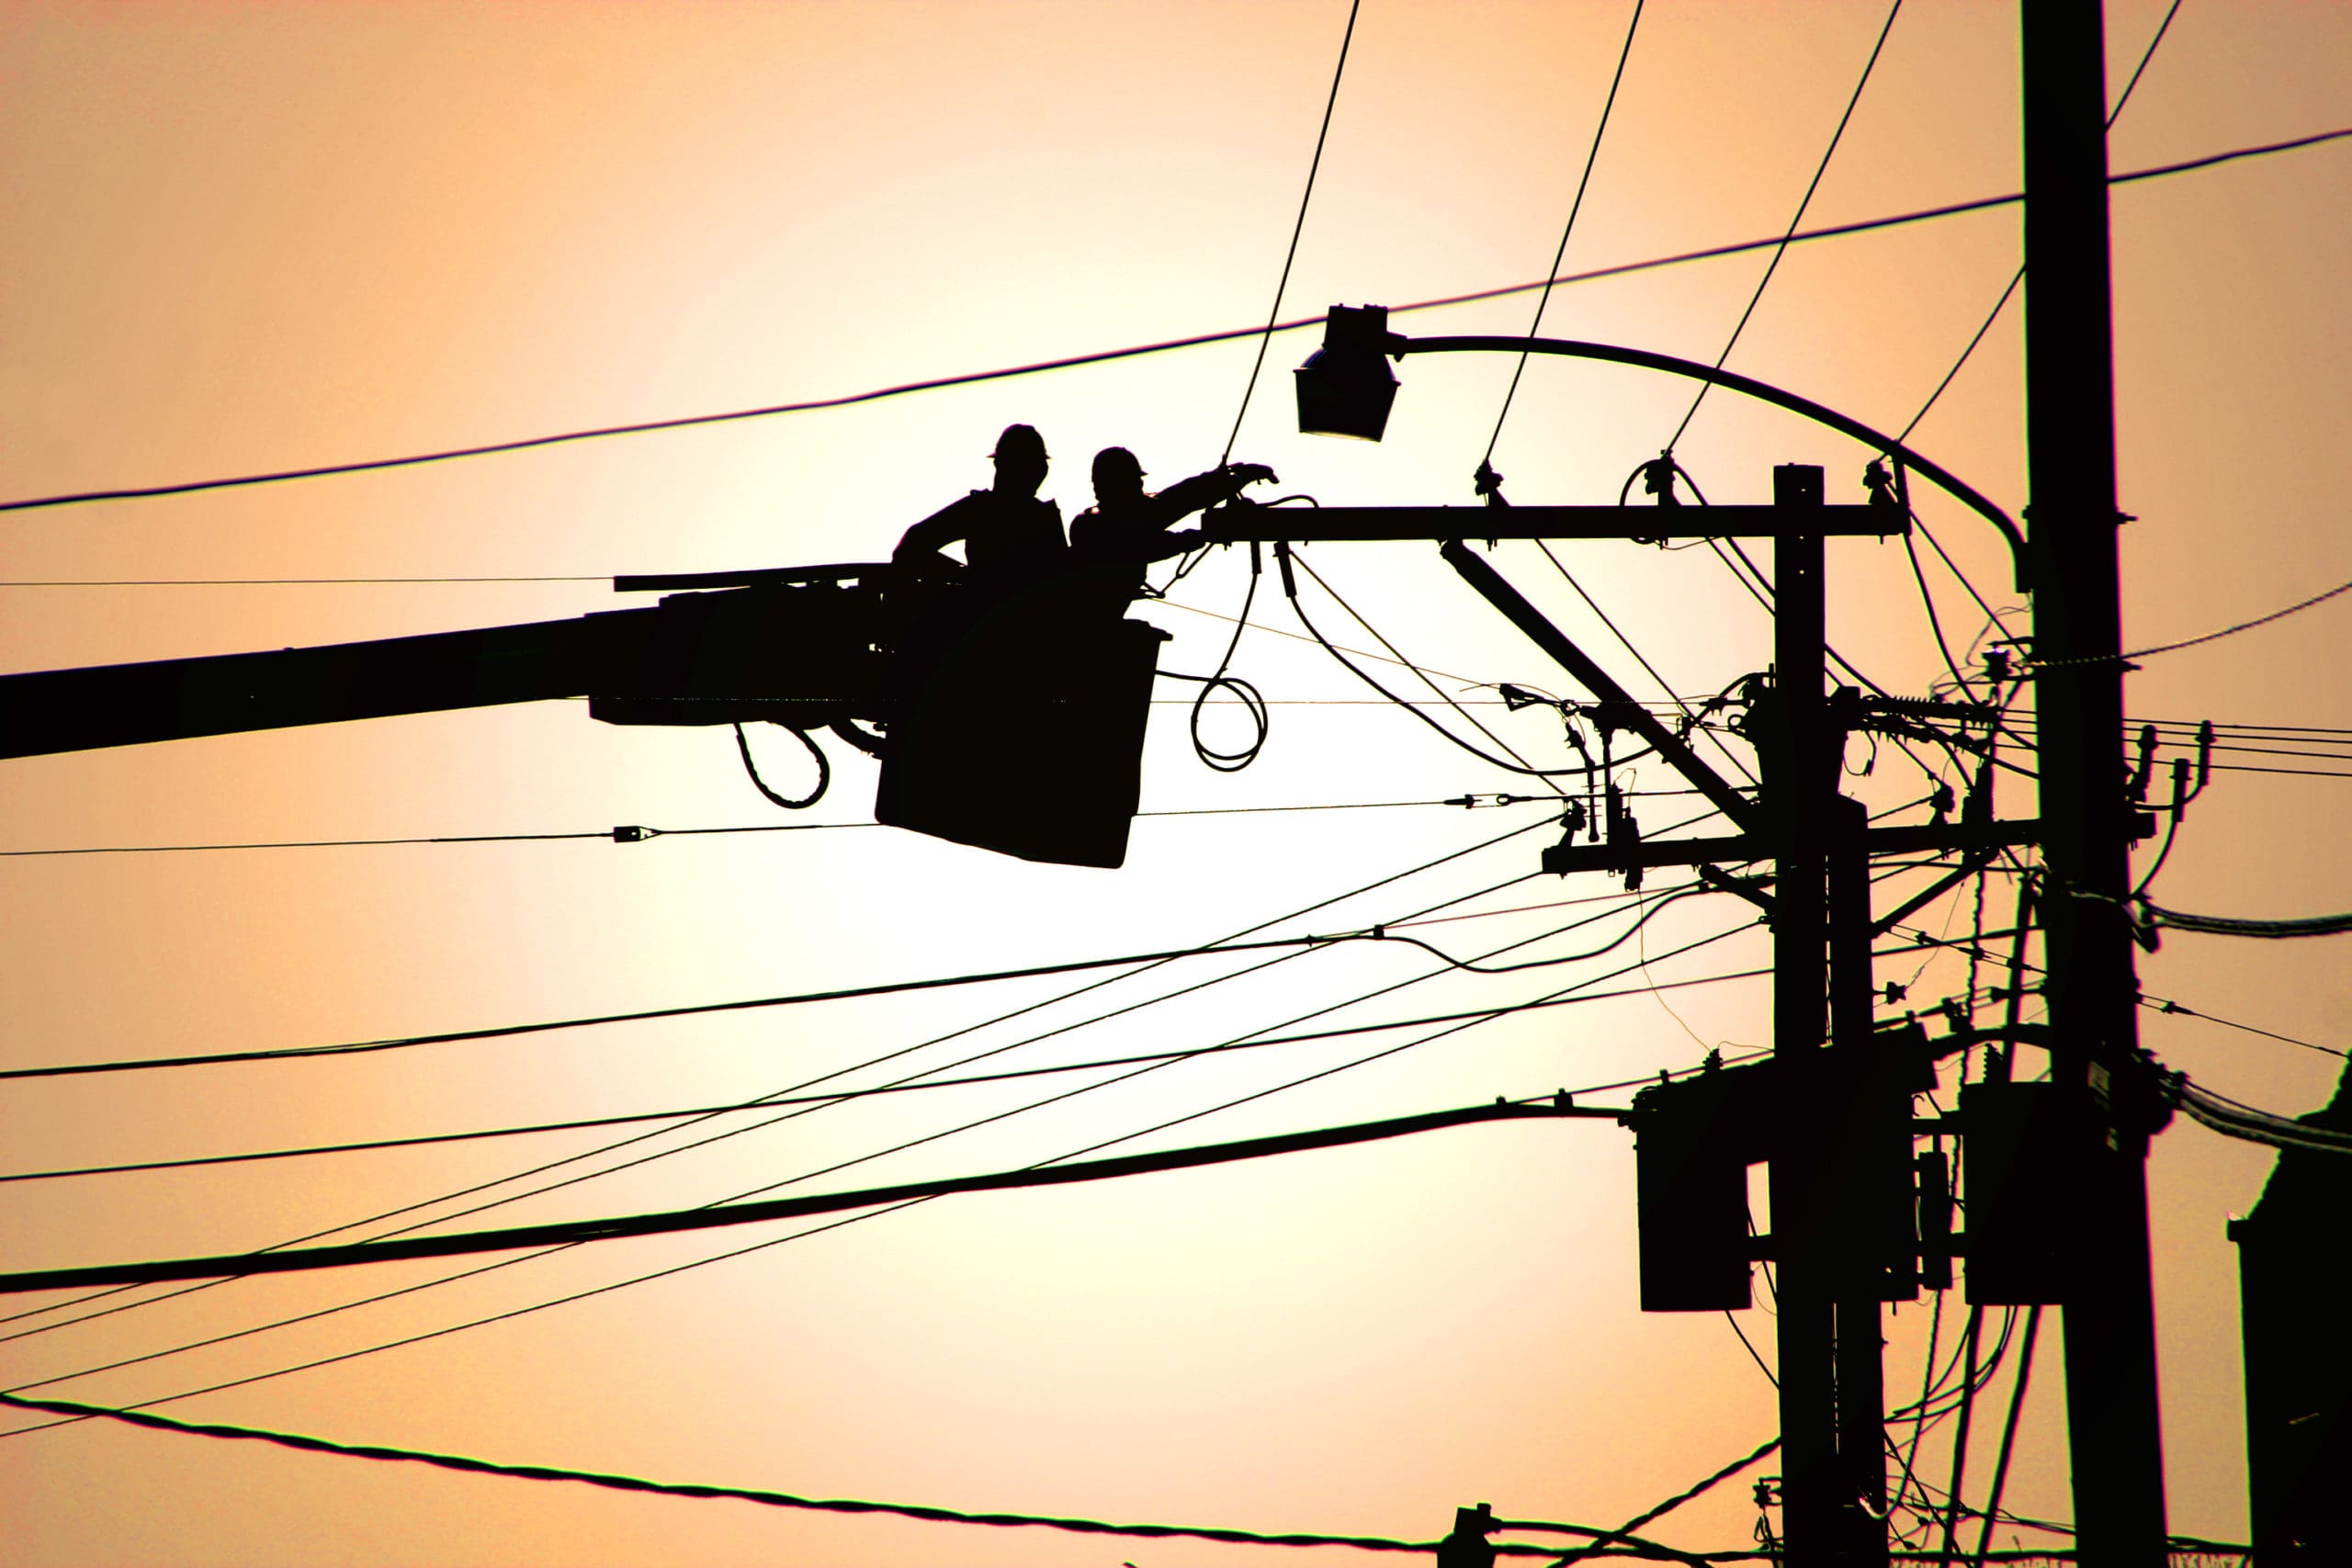 two workers at a utility company in a bucket working on power lines